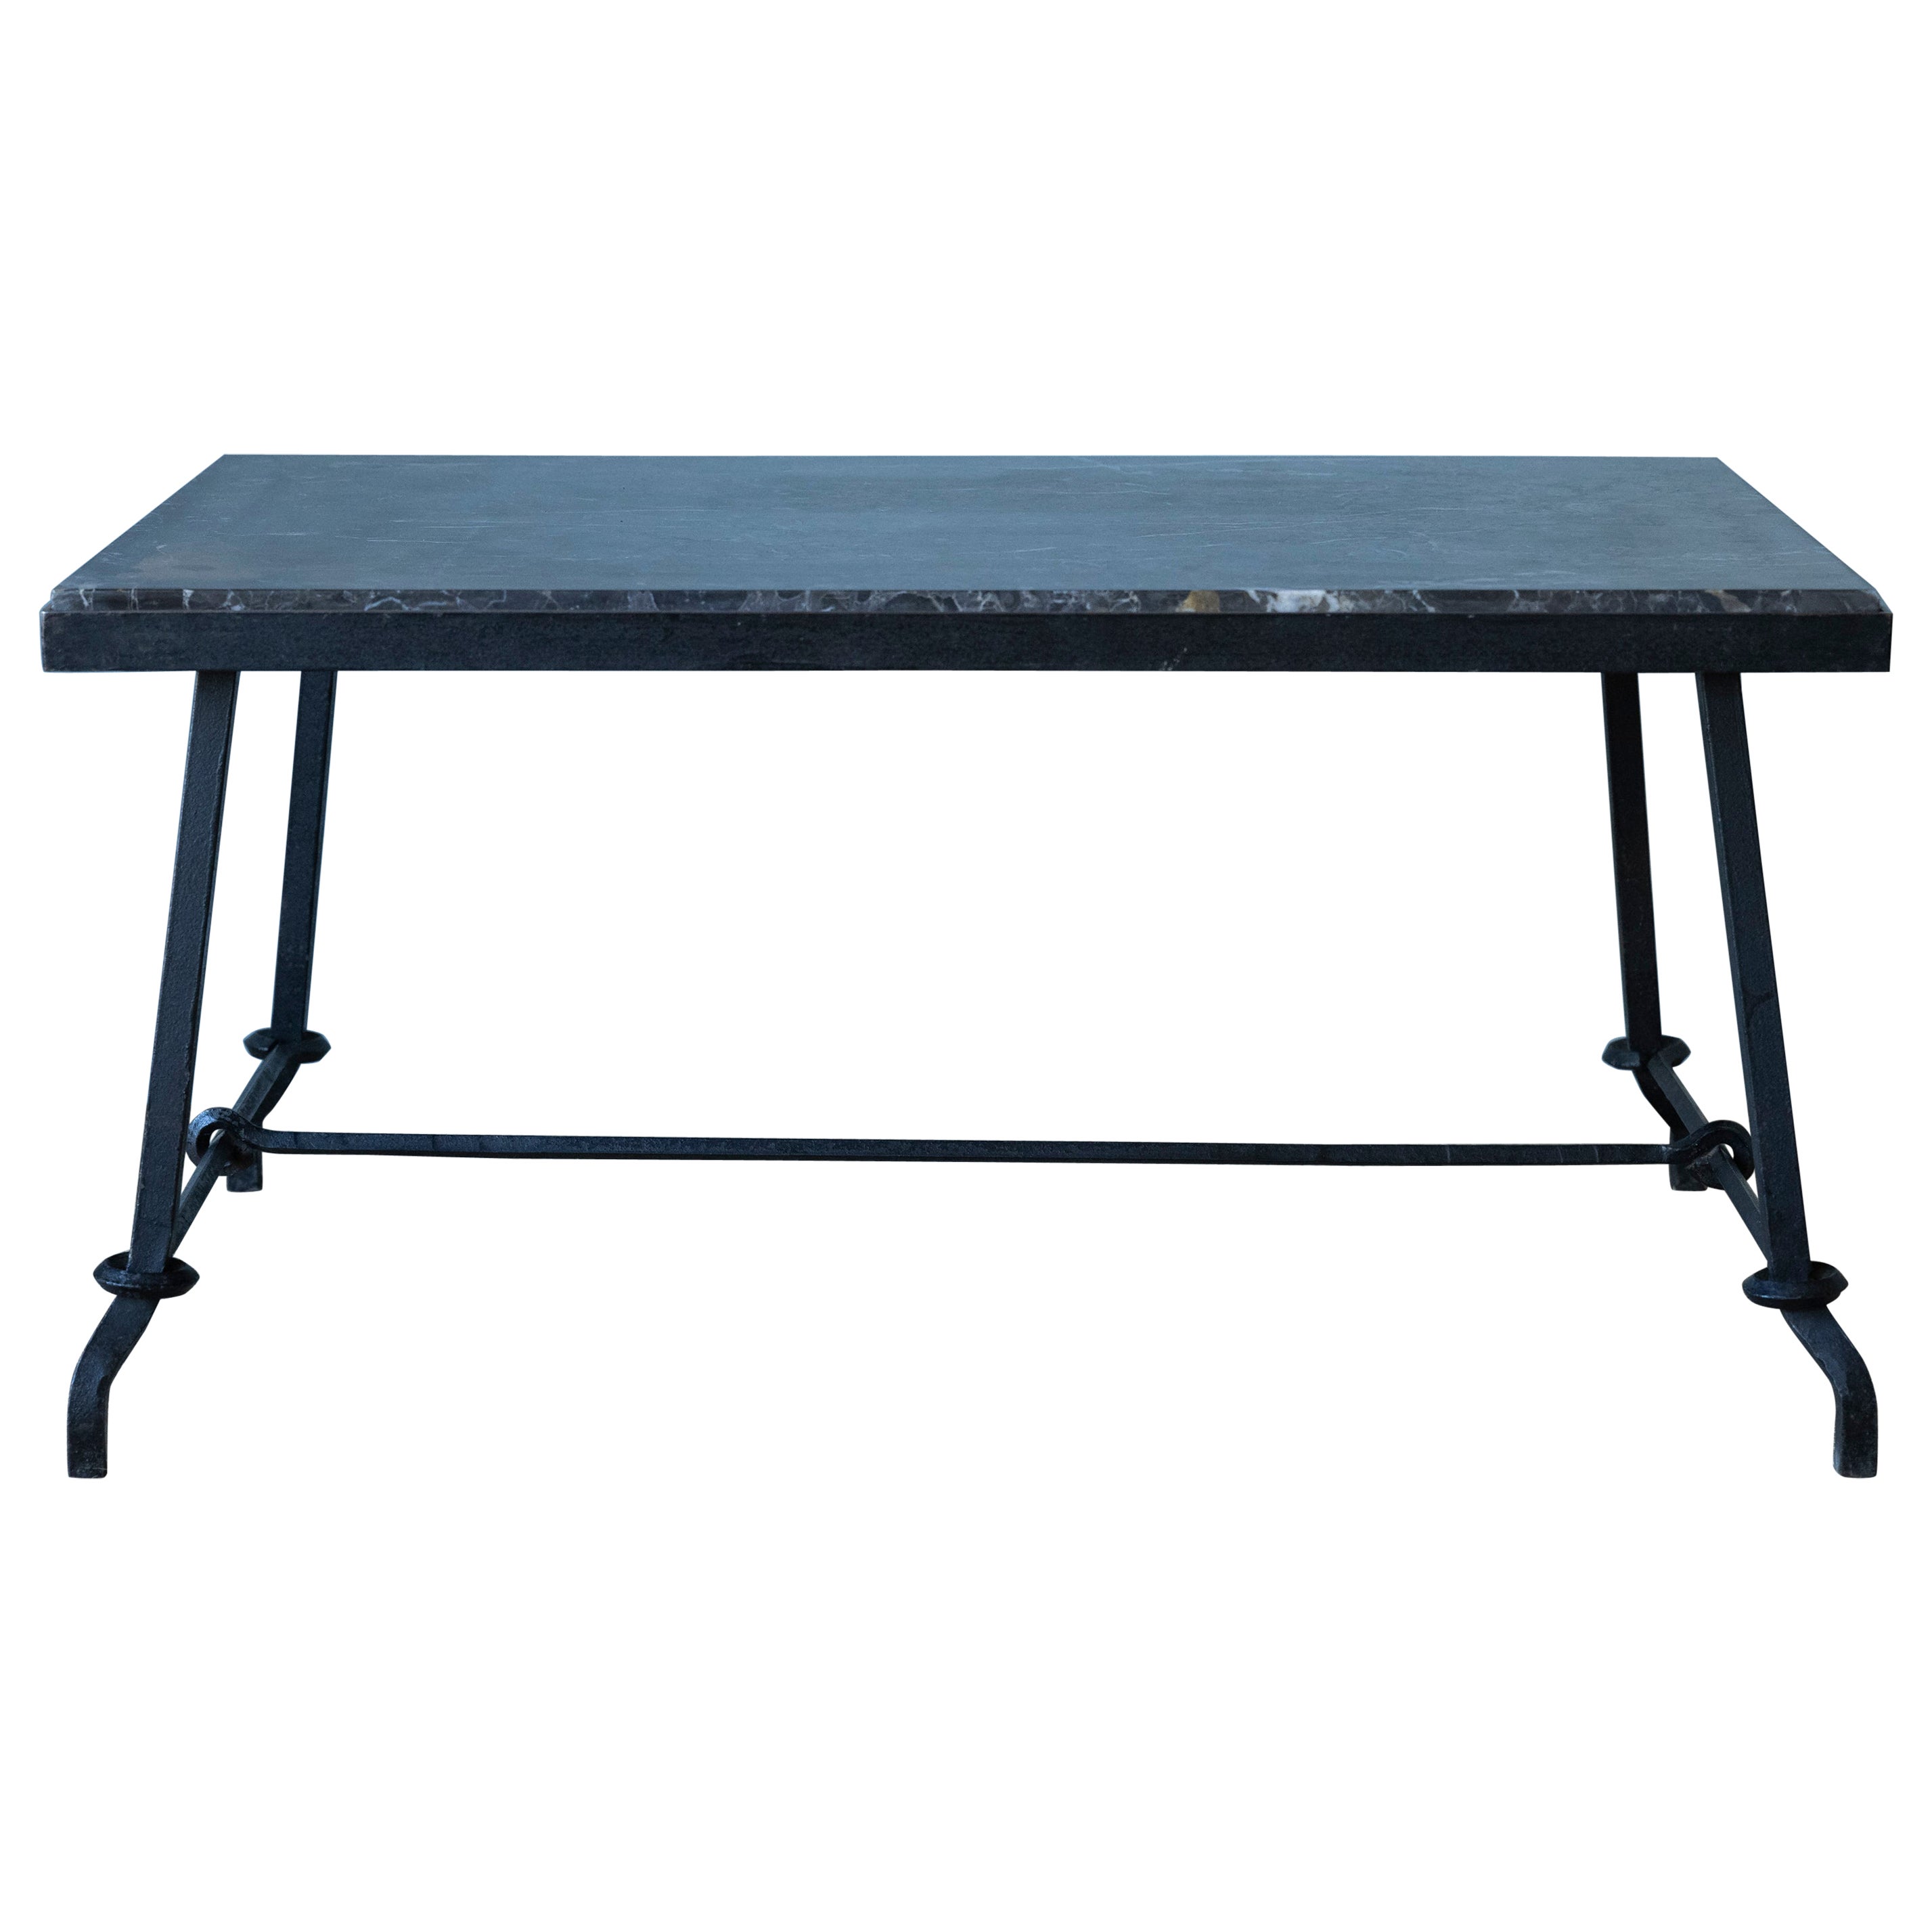 Jaques Adnet Steel Coffee Table with Marble Top For Sale